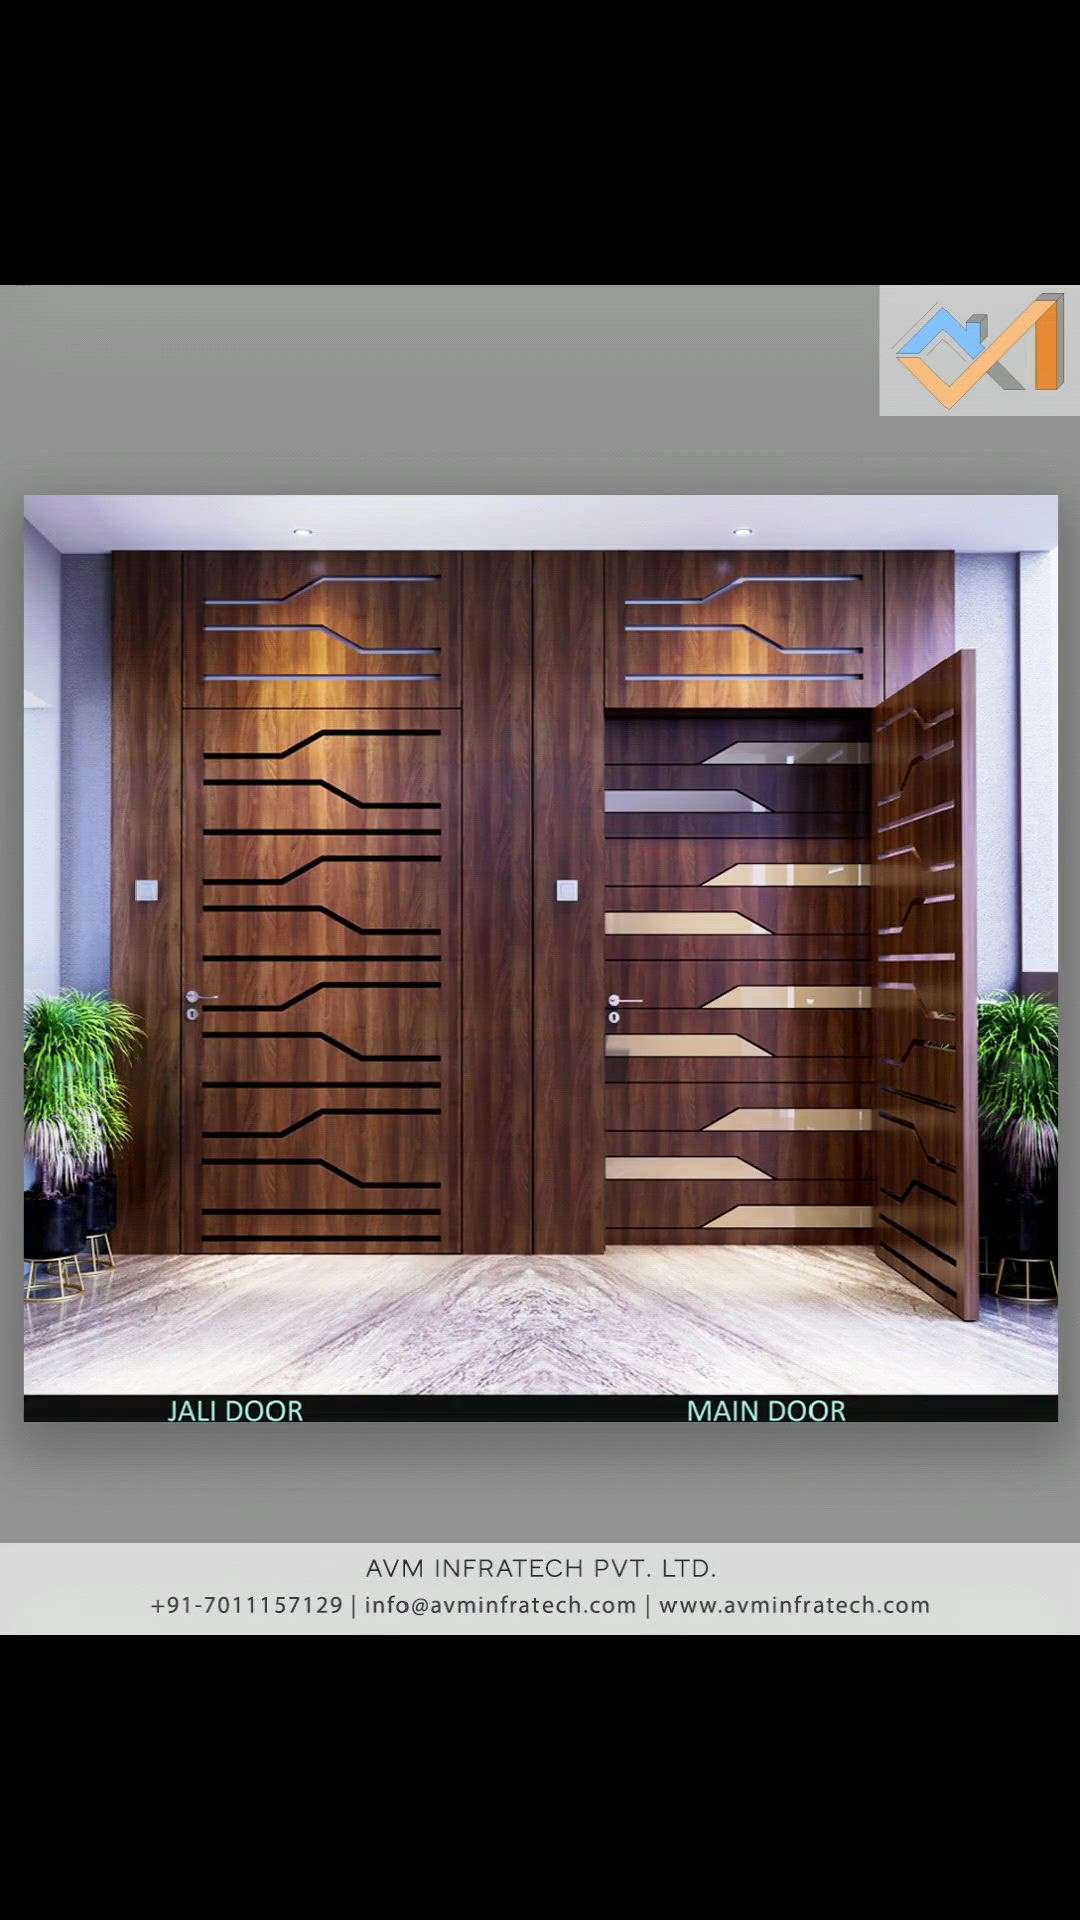 Main door designs accommodate every aspect required in style and give the house a more spacious outlook.


Follow us for more such amazing updates. 
.
.
#maindoor #maindoordesign #maindoors #door #doordesign #doors #doortodoor #maingate #gate #gatedesign #woodendoor #wooden #woodendoors #woodendoordesign #doordecor #doordecoration #doordetail #entrance #mainentrance #entrancedecor #entrancedoor #entrancedesign #avminfratech